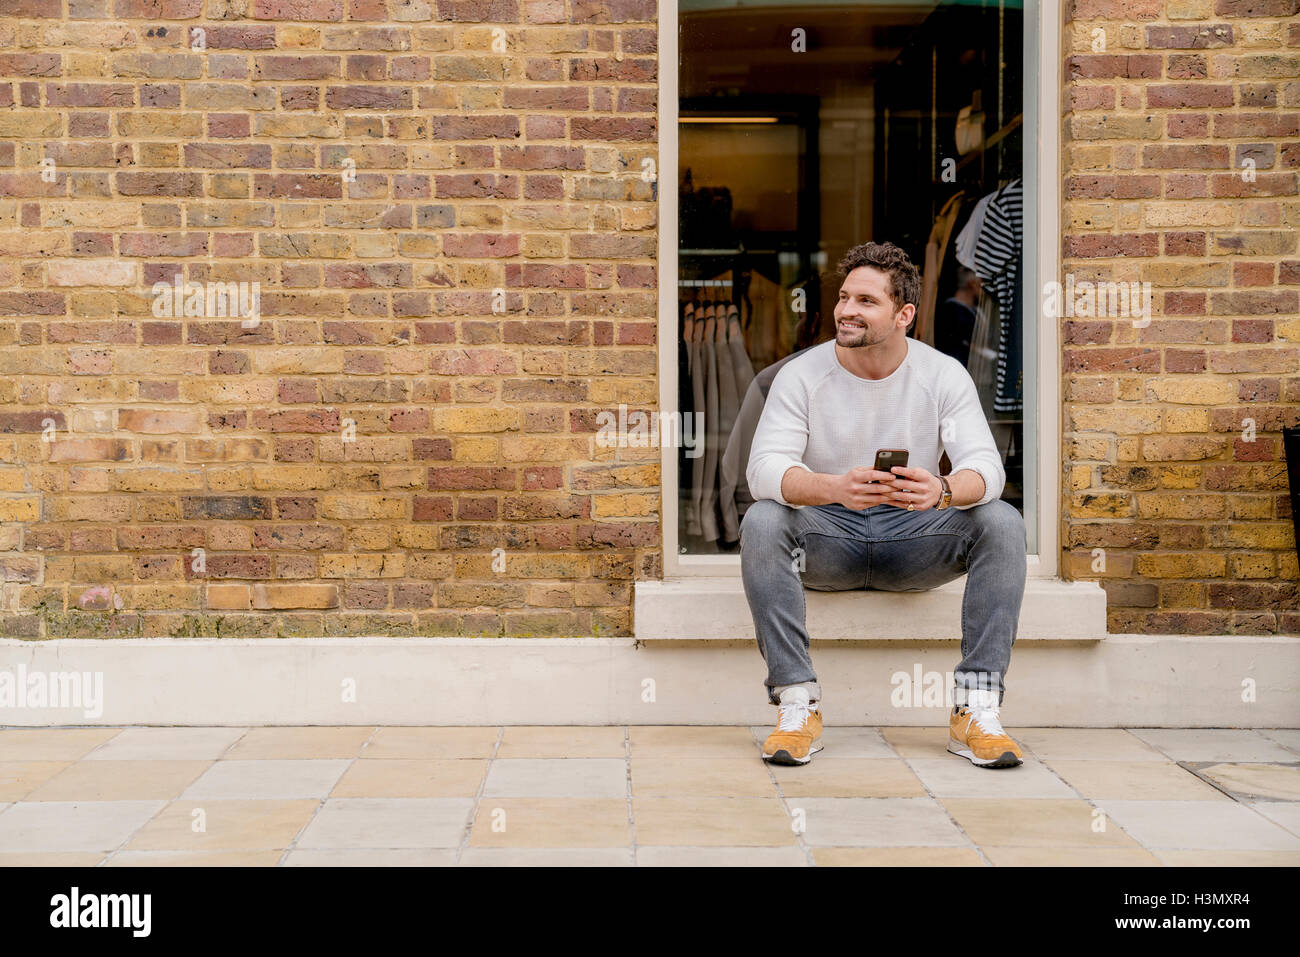 Young man with smartphone sitting on doorstep, Kings Road, London, UK Stock Photo